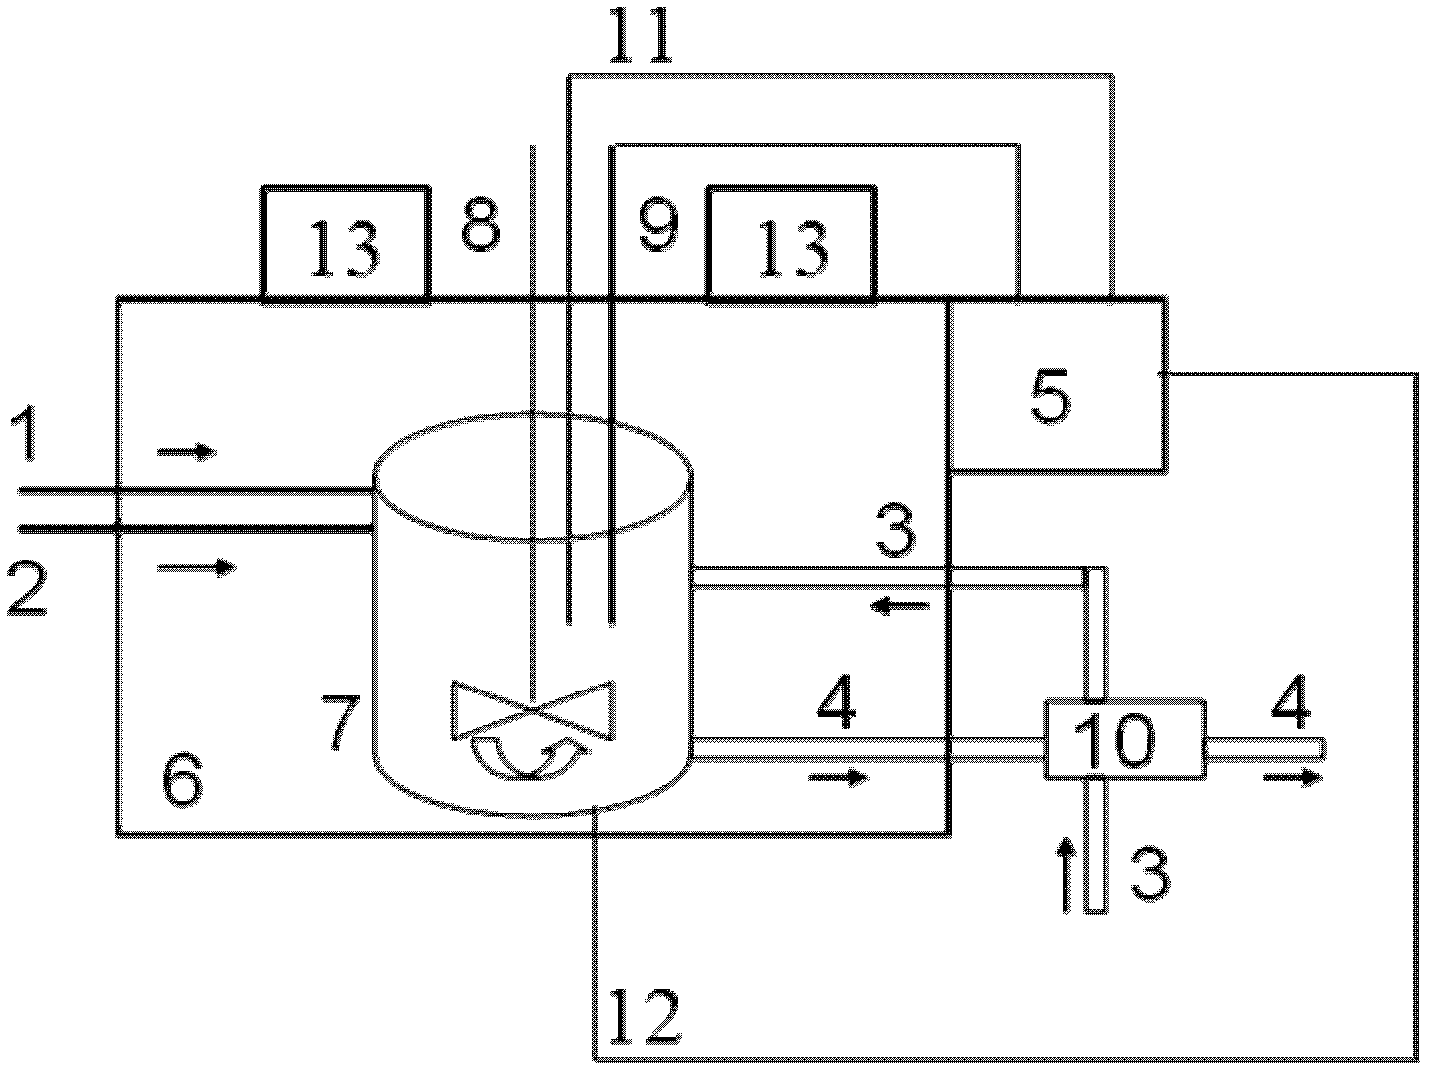 Method and apparatus for source sludge reduction based on microwave sludge pretreatment